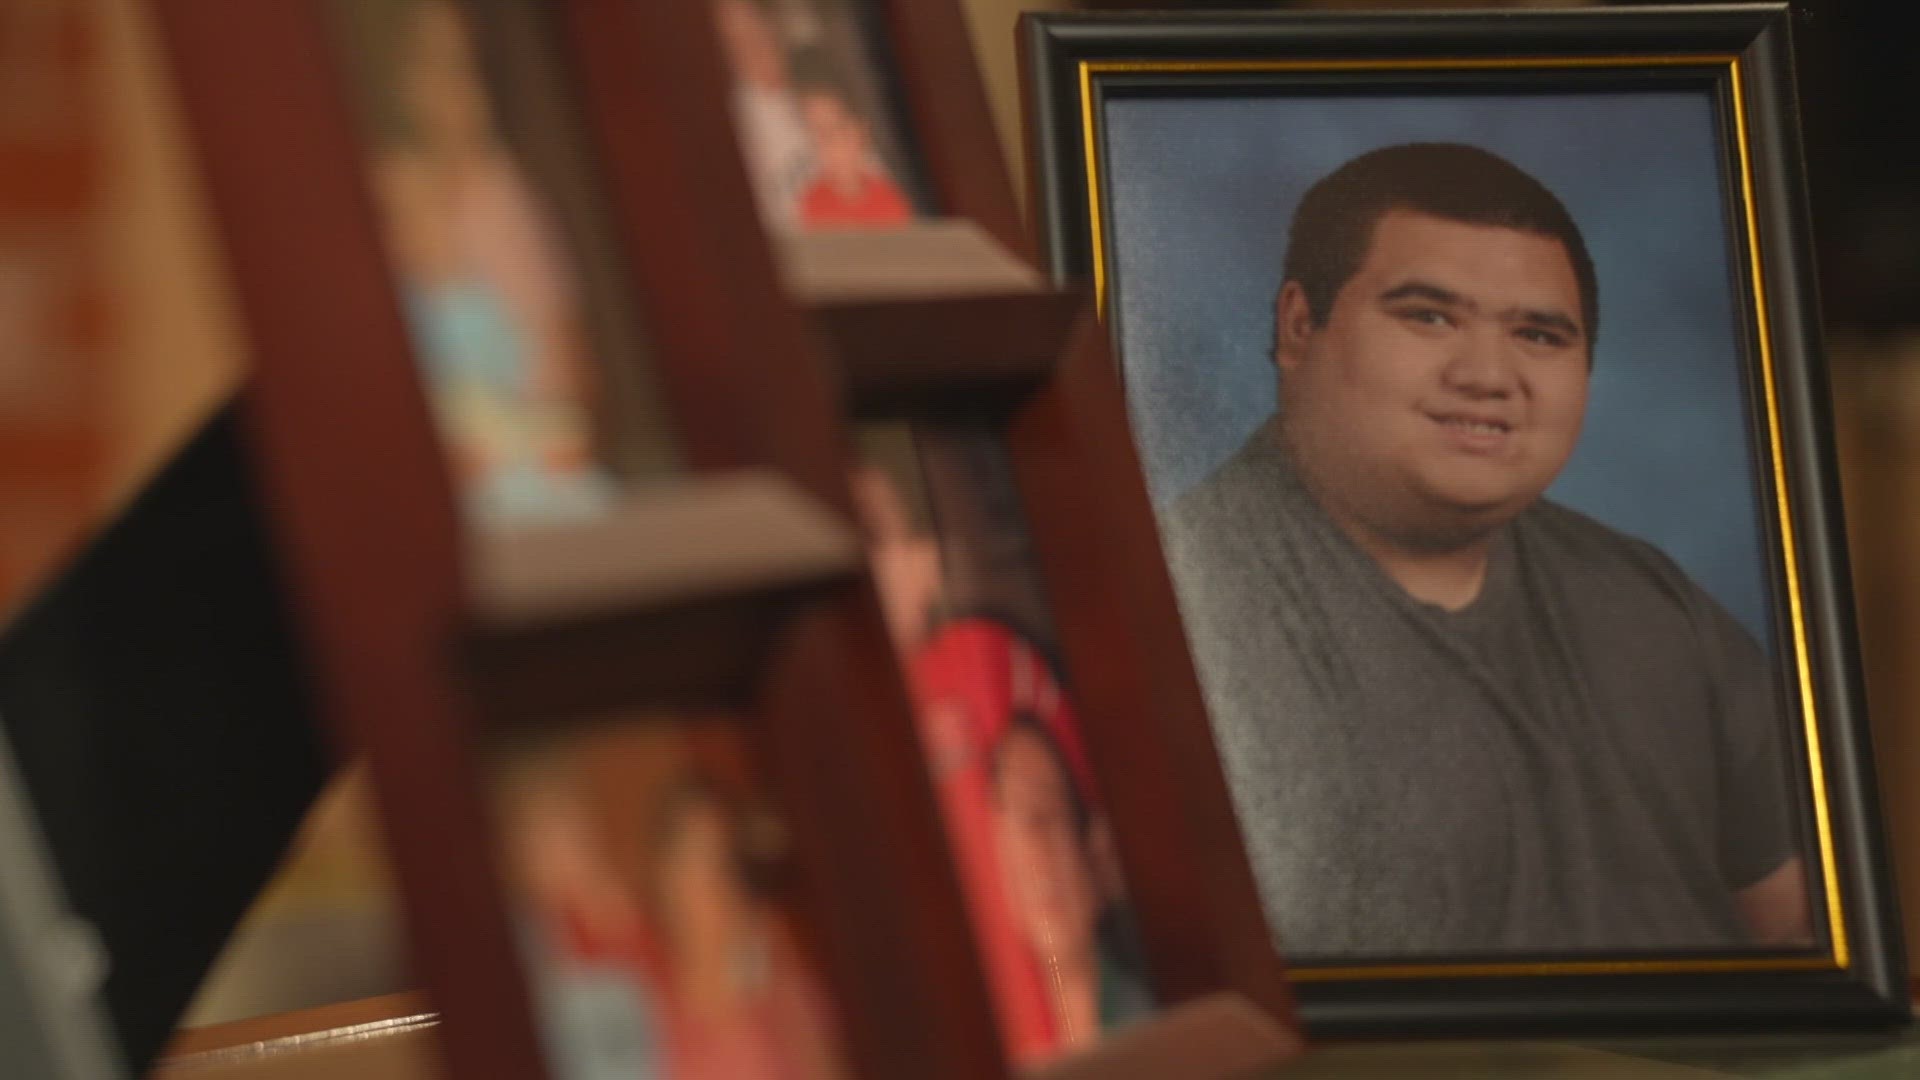 Eric Parsa was killed outside of the Laser Tag of Metairie in 2020 when JPSO Deputies restrained him in a prone position during a violent autistic meltdown